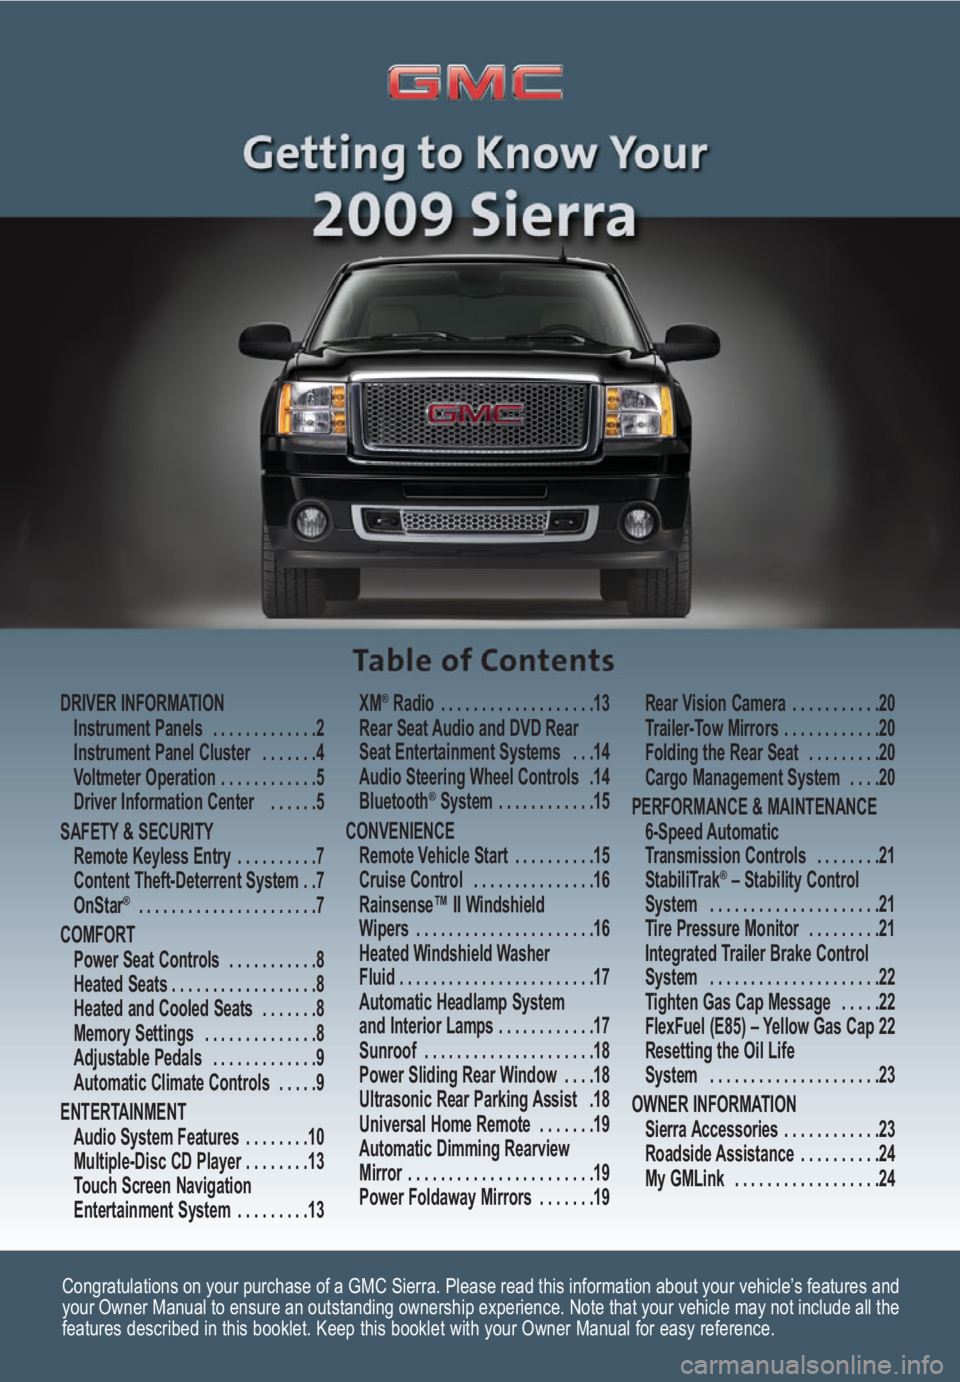 GMC SIERRA 2009  Get To Know Guide Congratulations on your purchase of a GMC Sierra. Please read this information about your vehicle’s features and
your Owner Manual to ensure an outstanding ownership experience. Note that your vehic